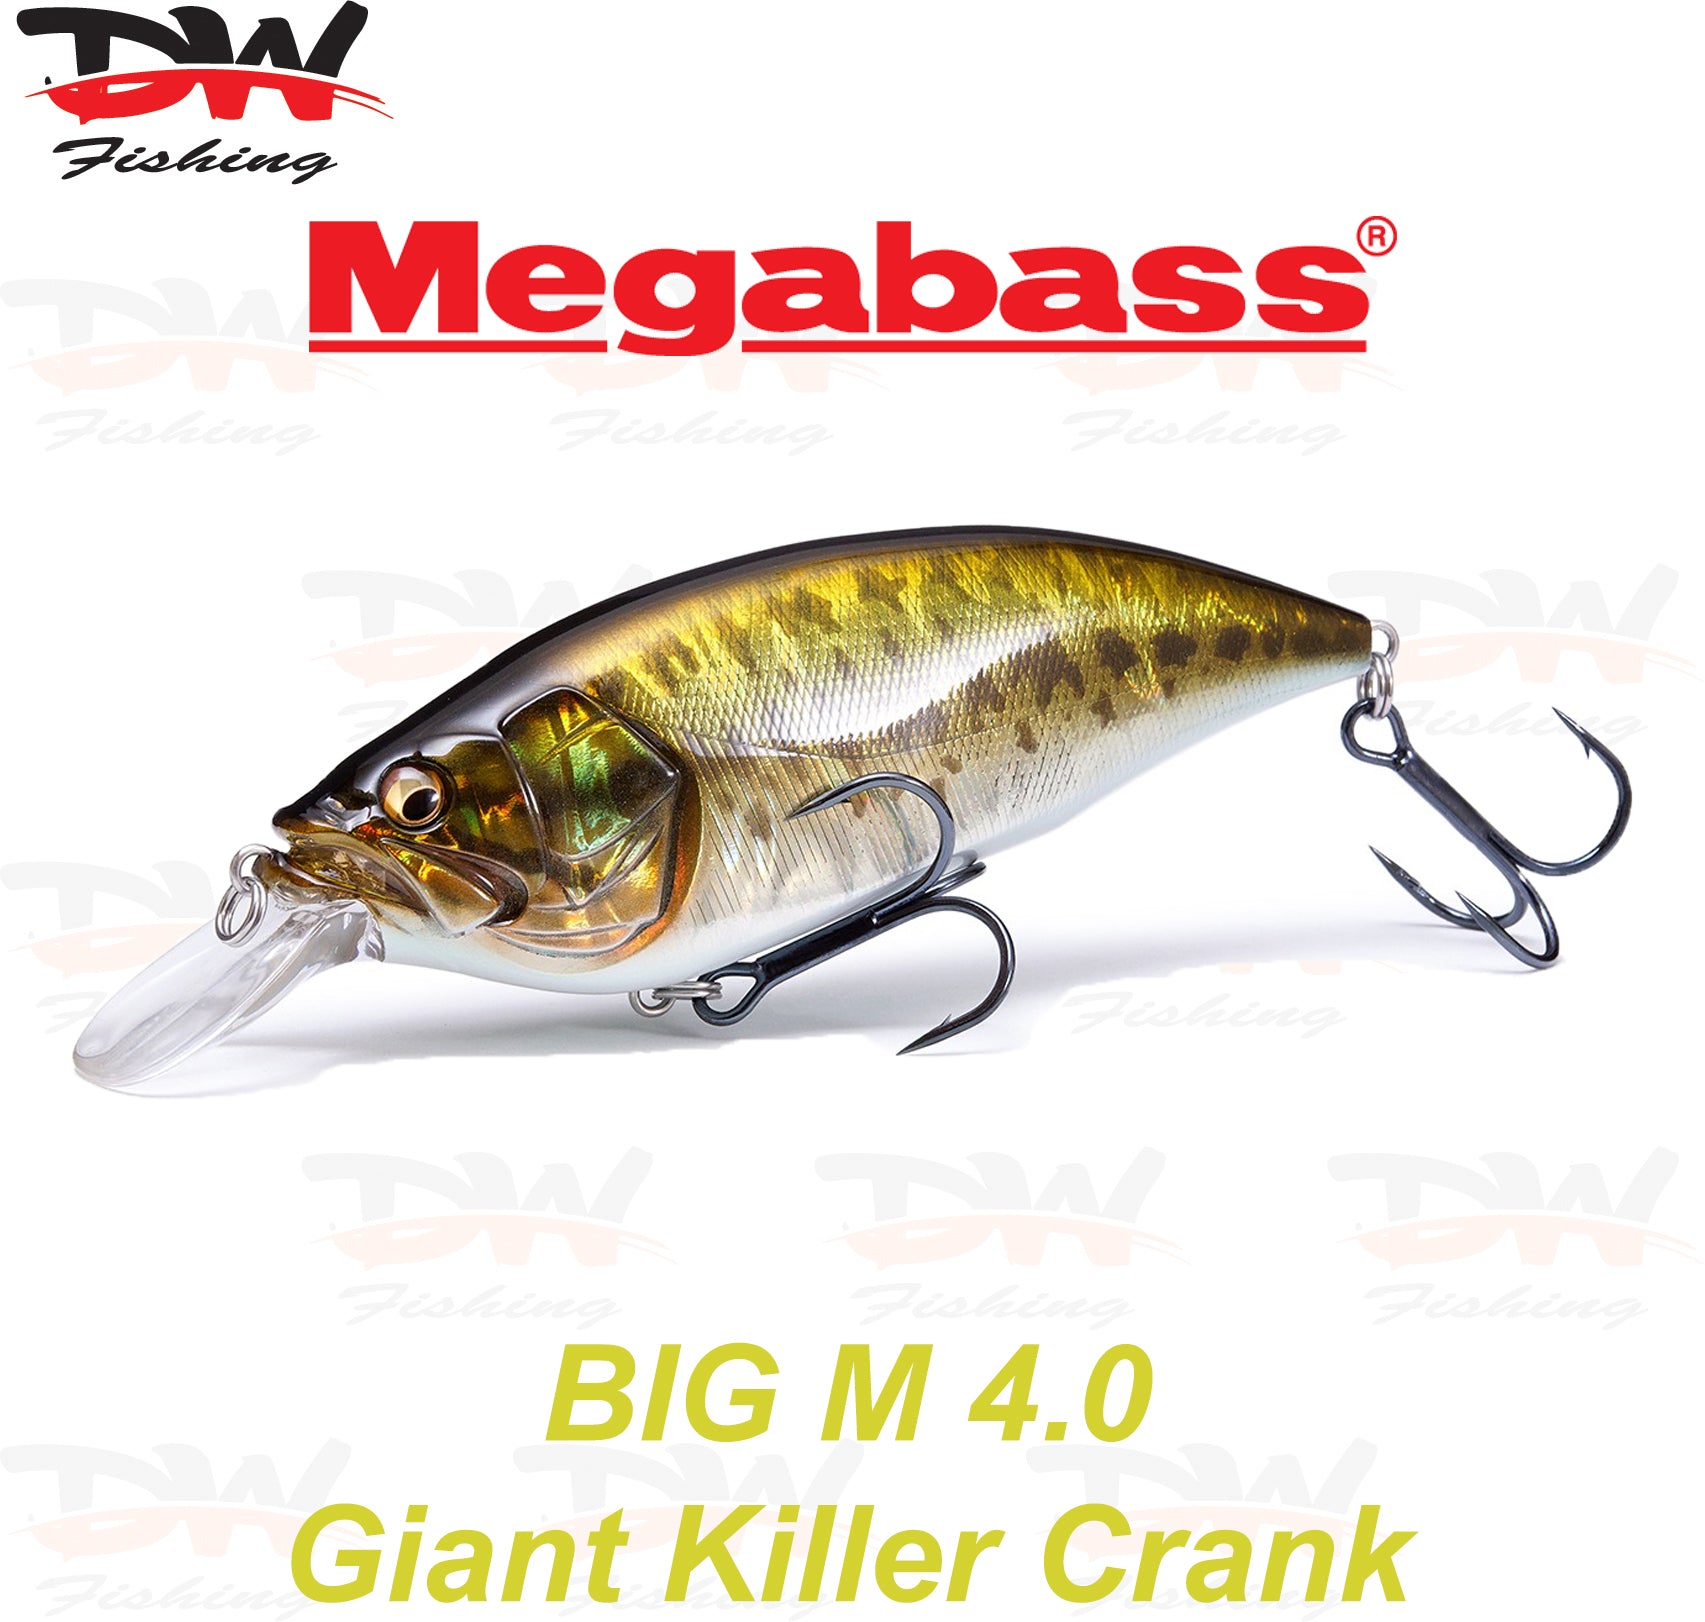 Megabass Big-M 4.0 floating hard body diving lure cover picture